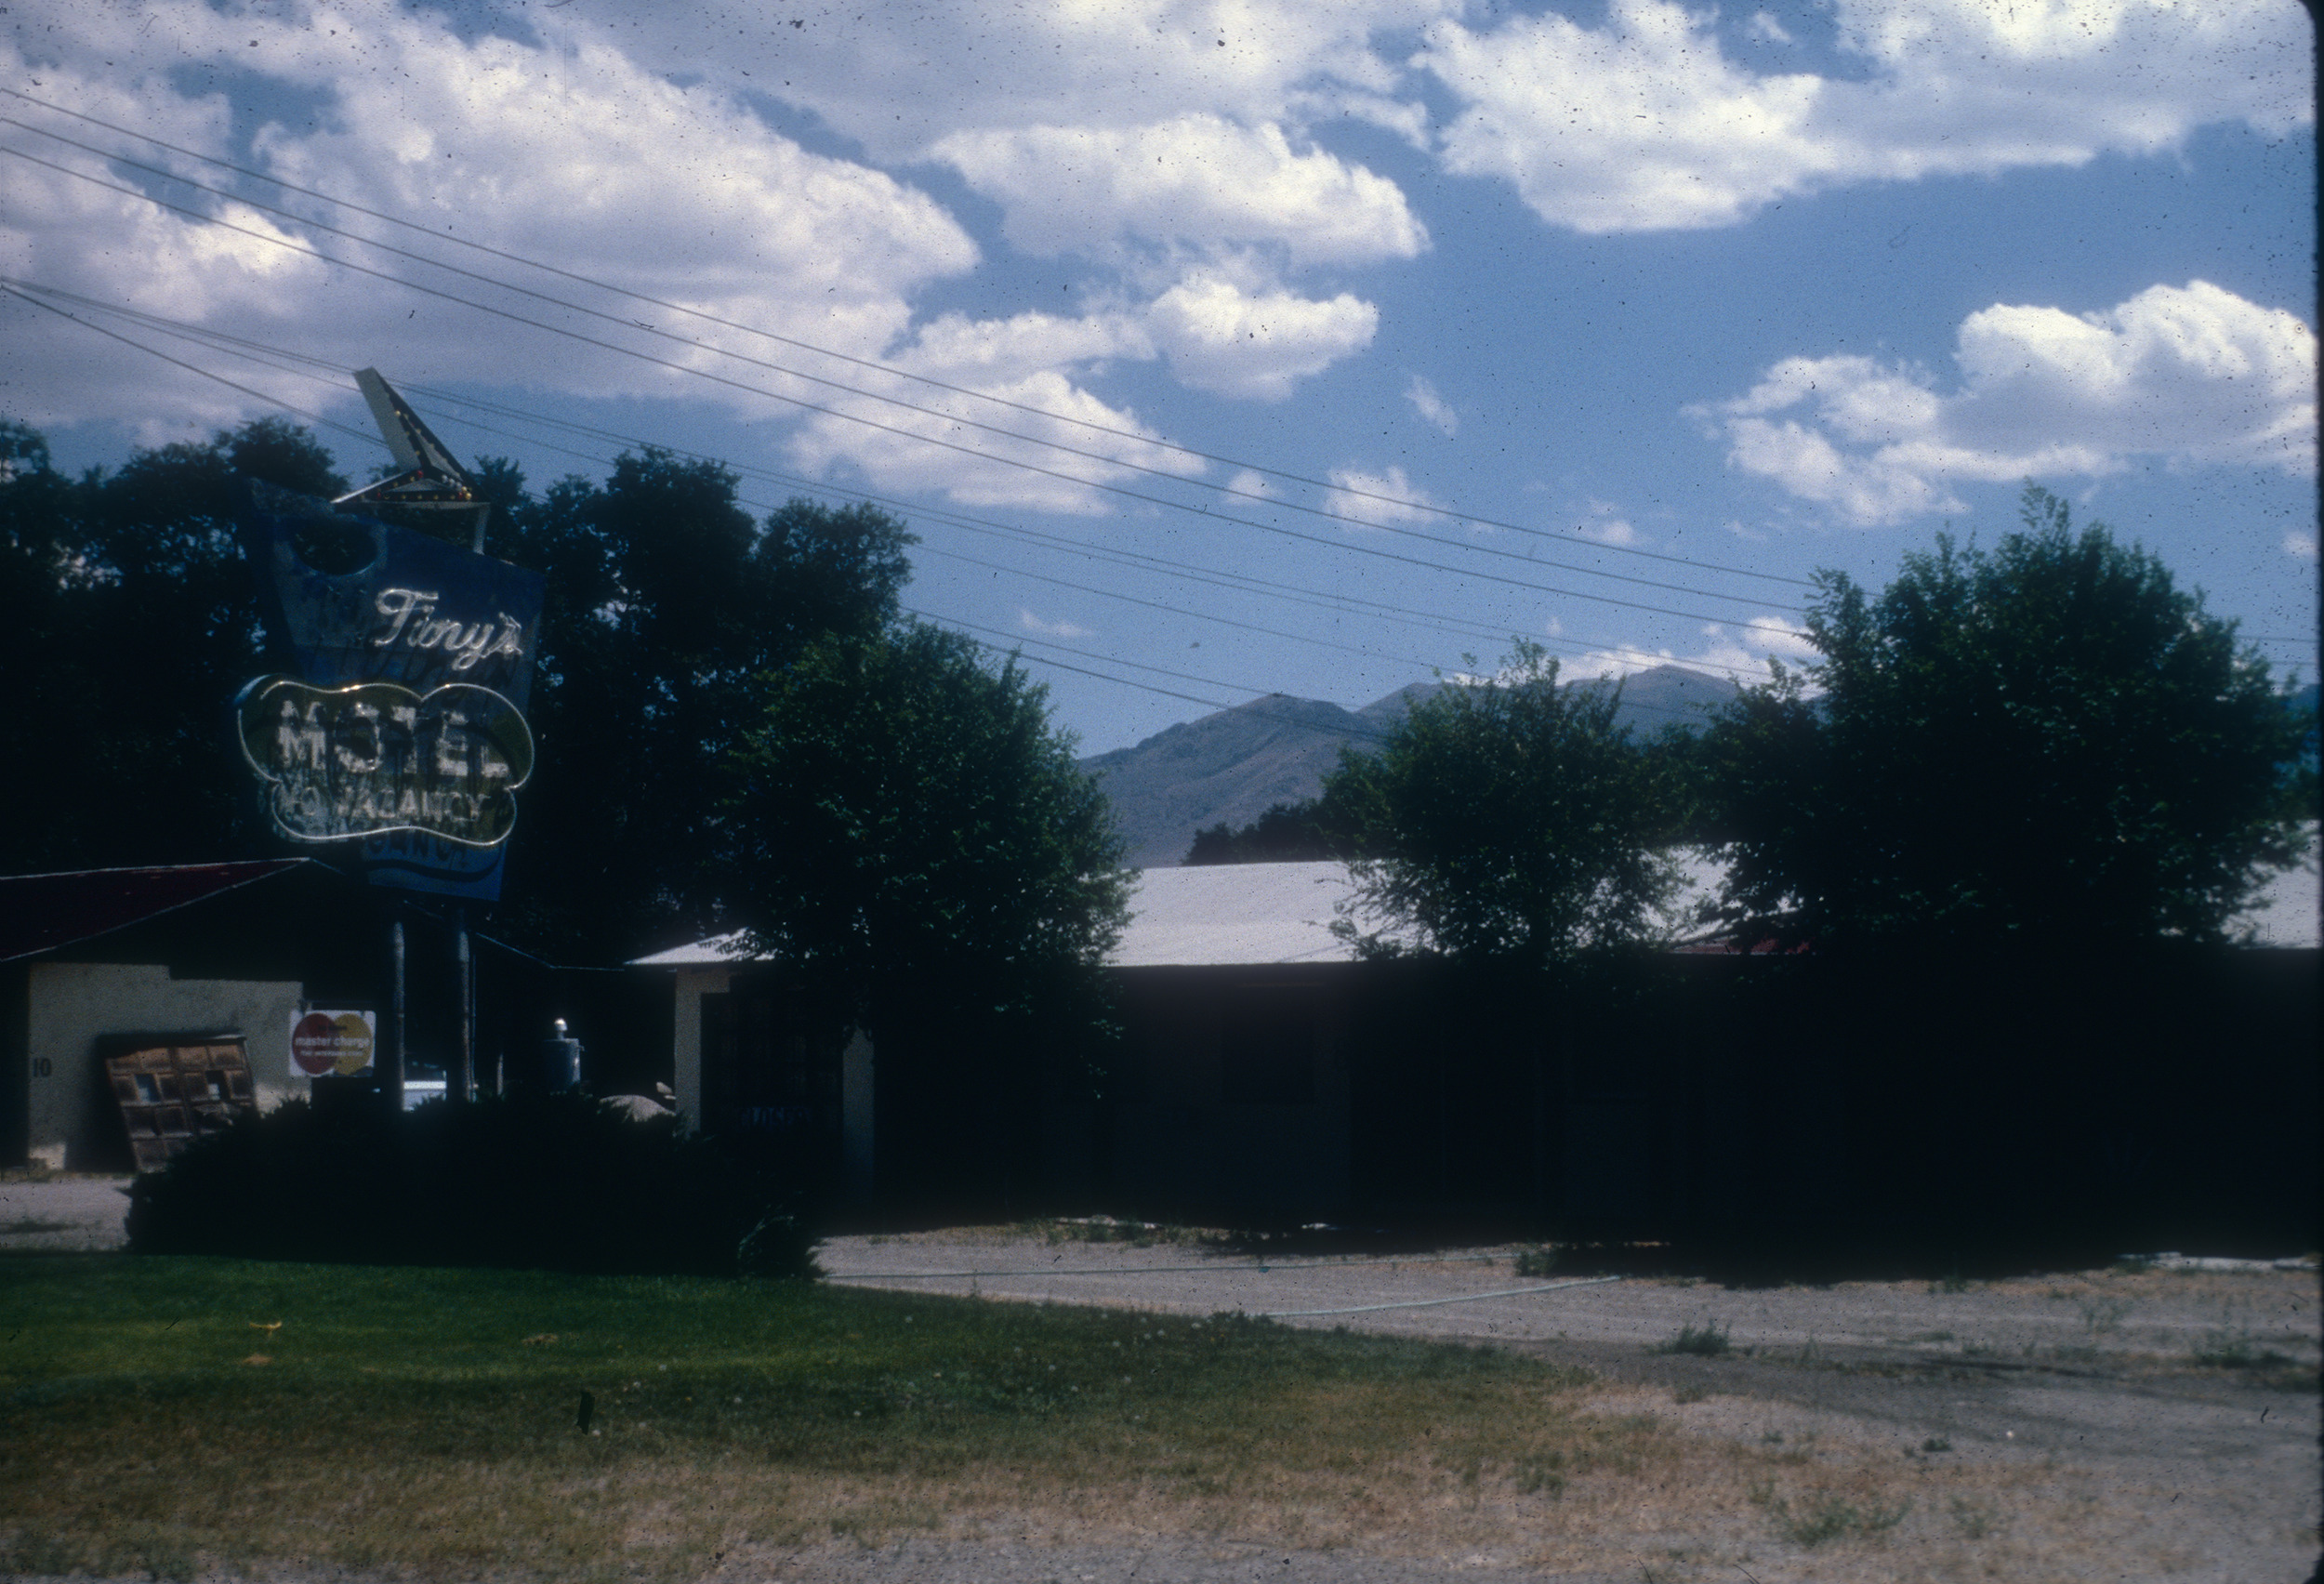 Slide of Tiny's Motel and its neon sign, Winnemucca, Nevada, 1986